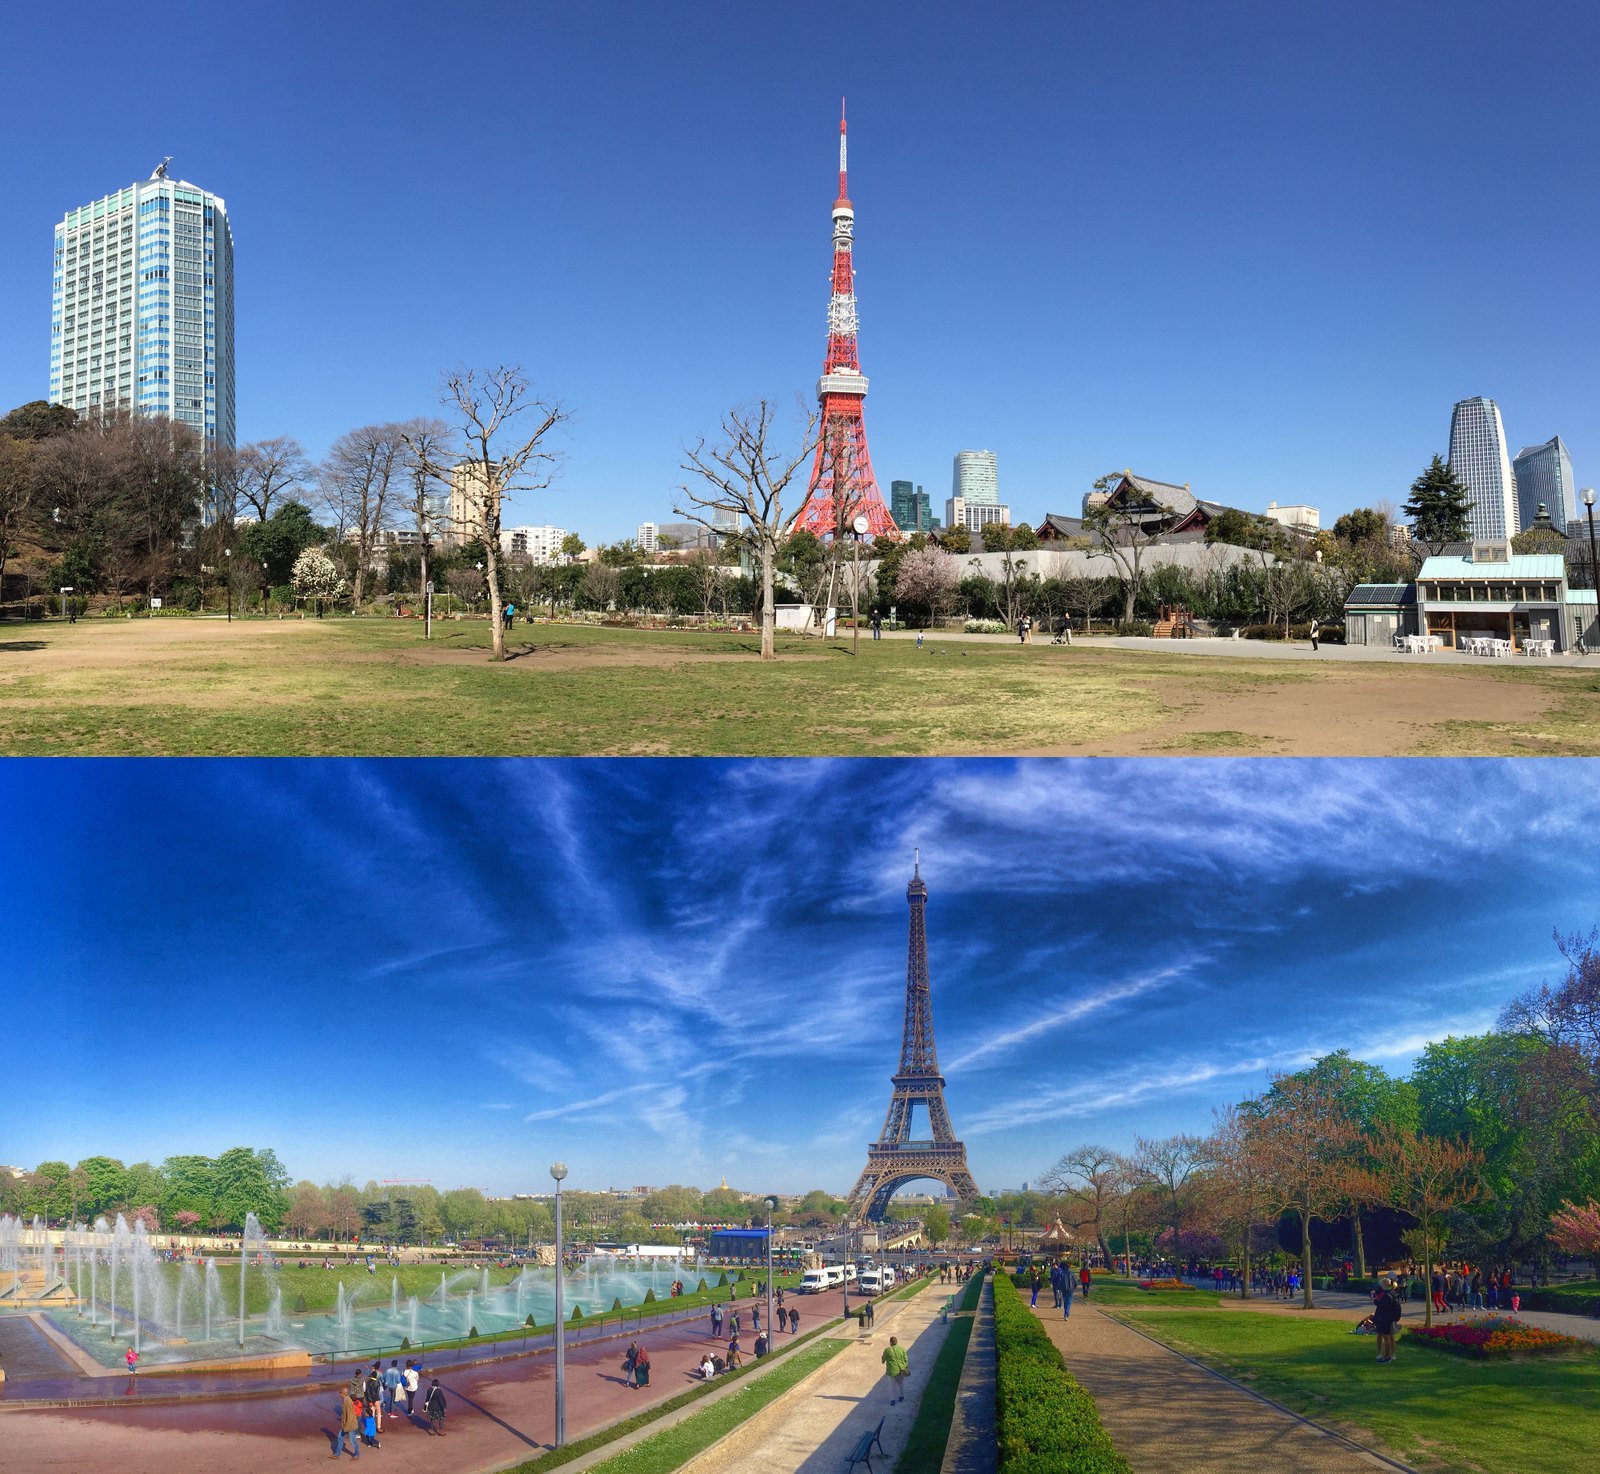 Panorama Tokyo Tower and Eiffel Tower